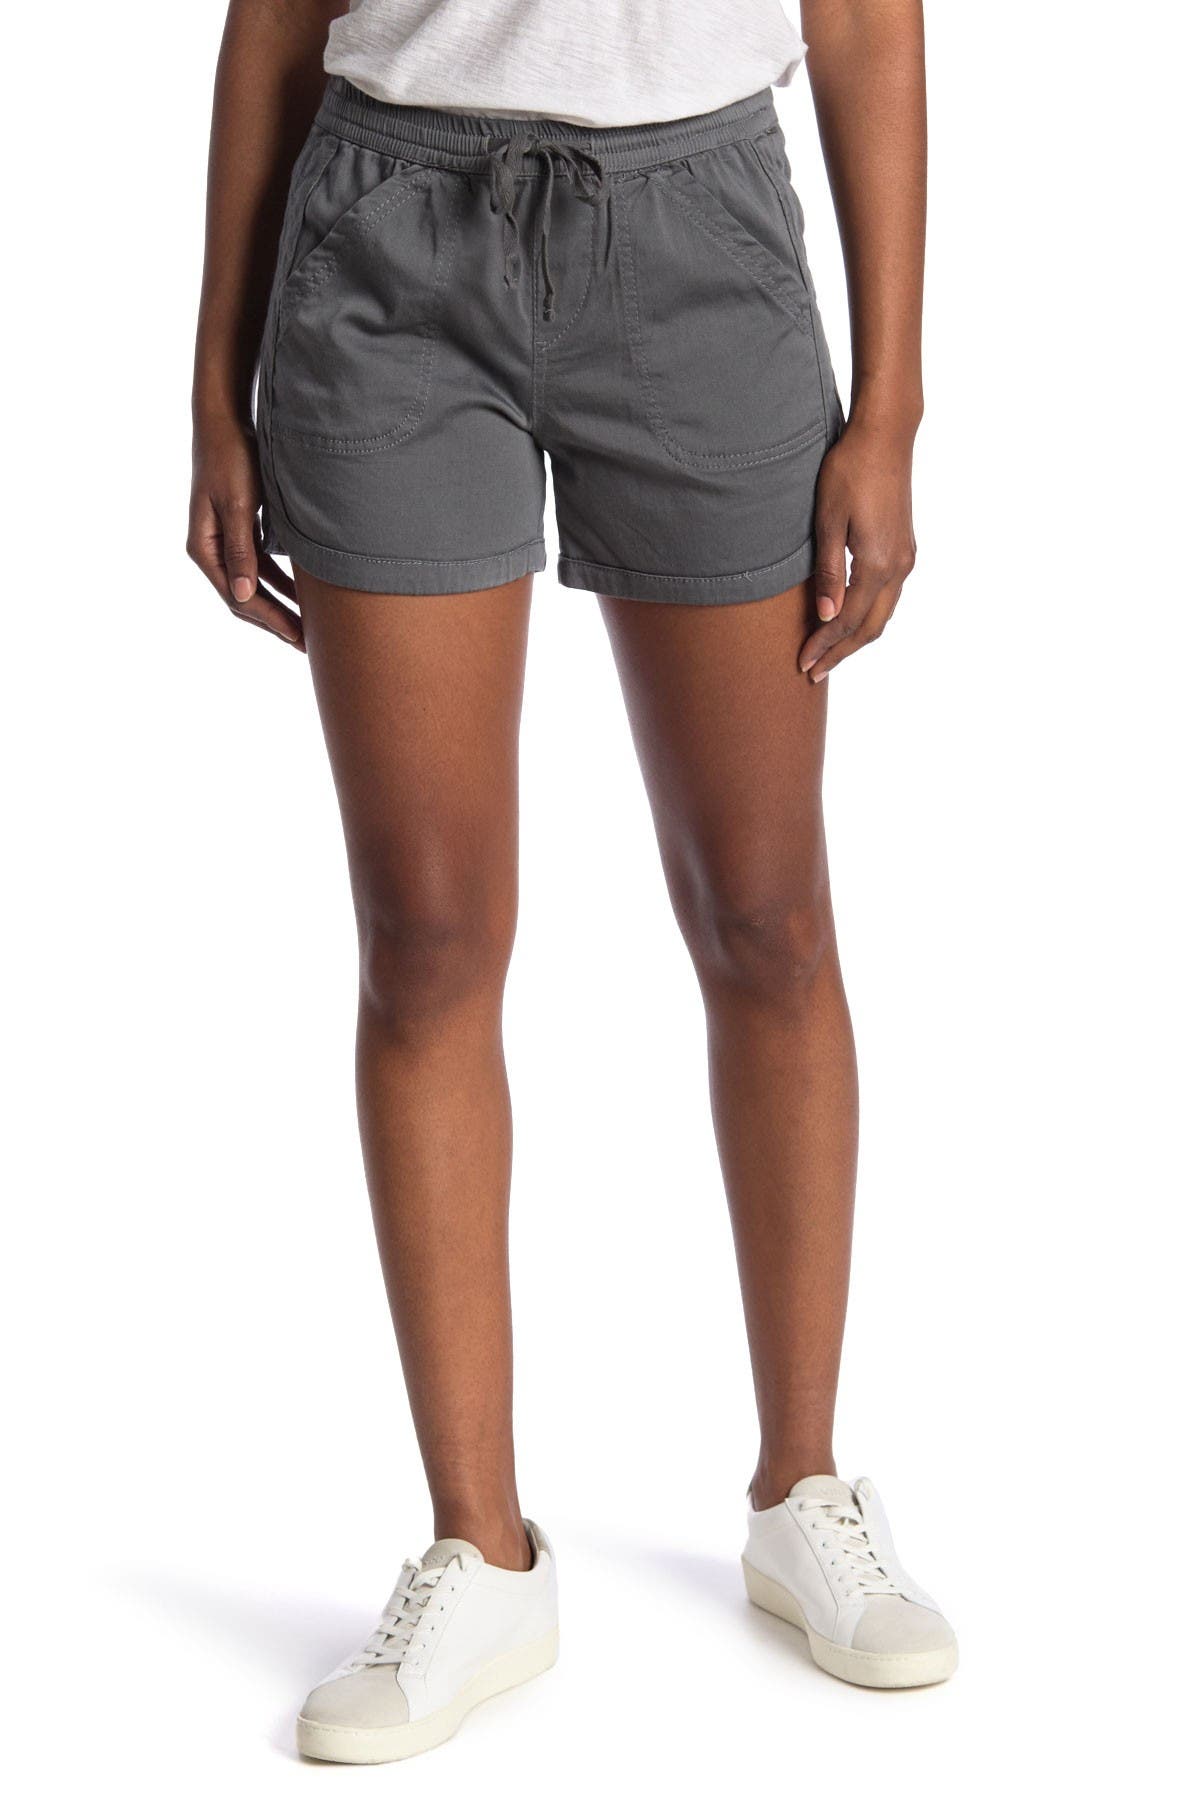 Supplies By Unionbay Marsha Knit Shorts In Light/pastel Grey6